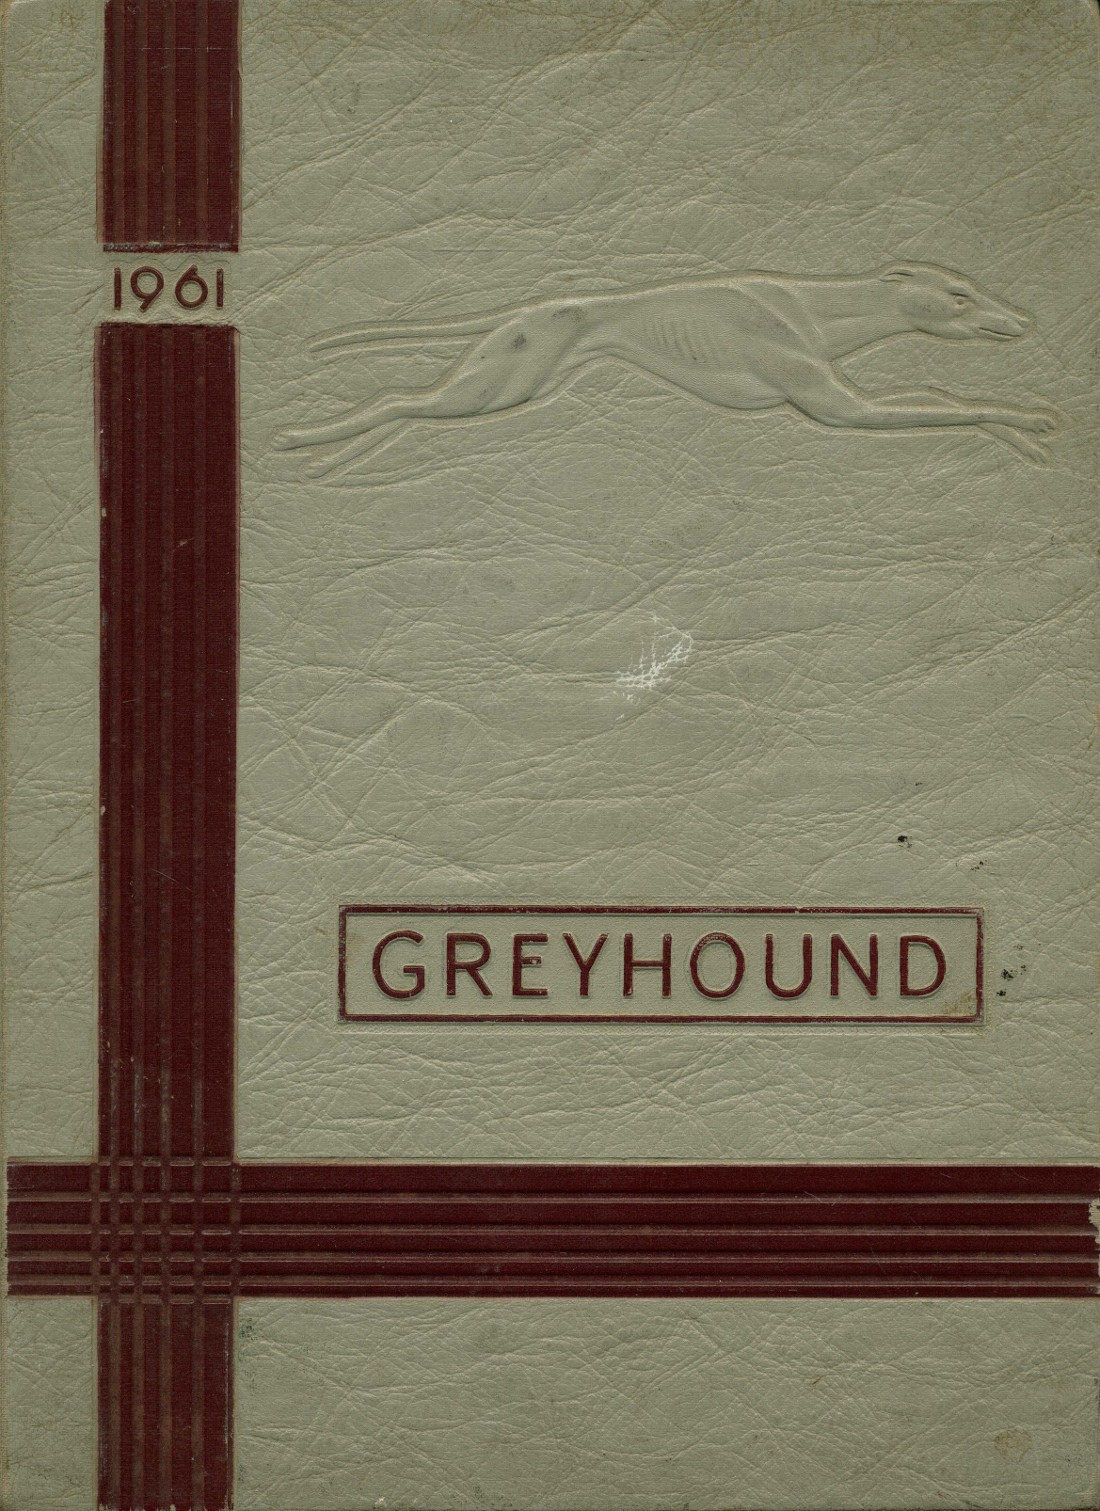 1961 yearbook from I.C. High School from Portsmouth, Virginia